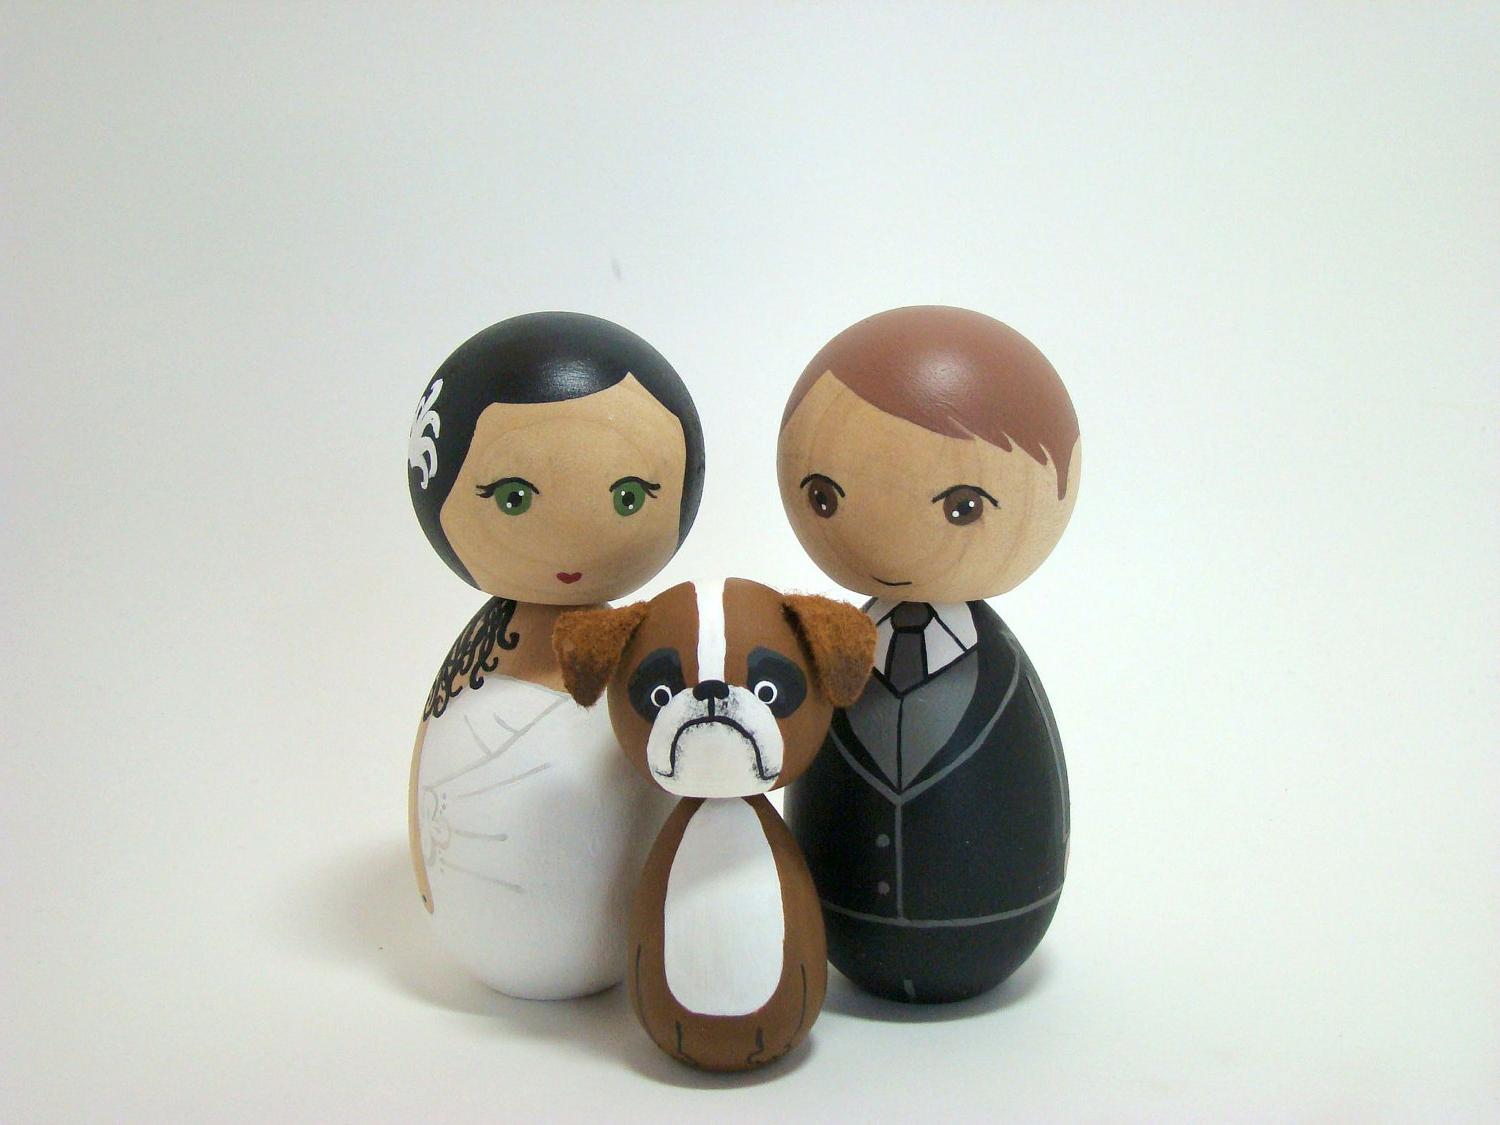 Custom Kokeshi Doll Wedding Cake Toppers with 1 pet. From Pegged